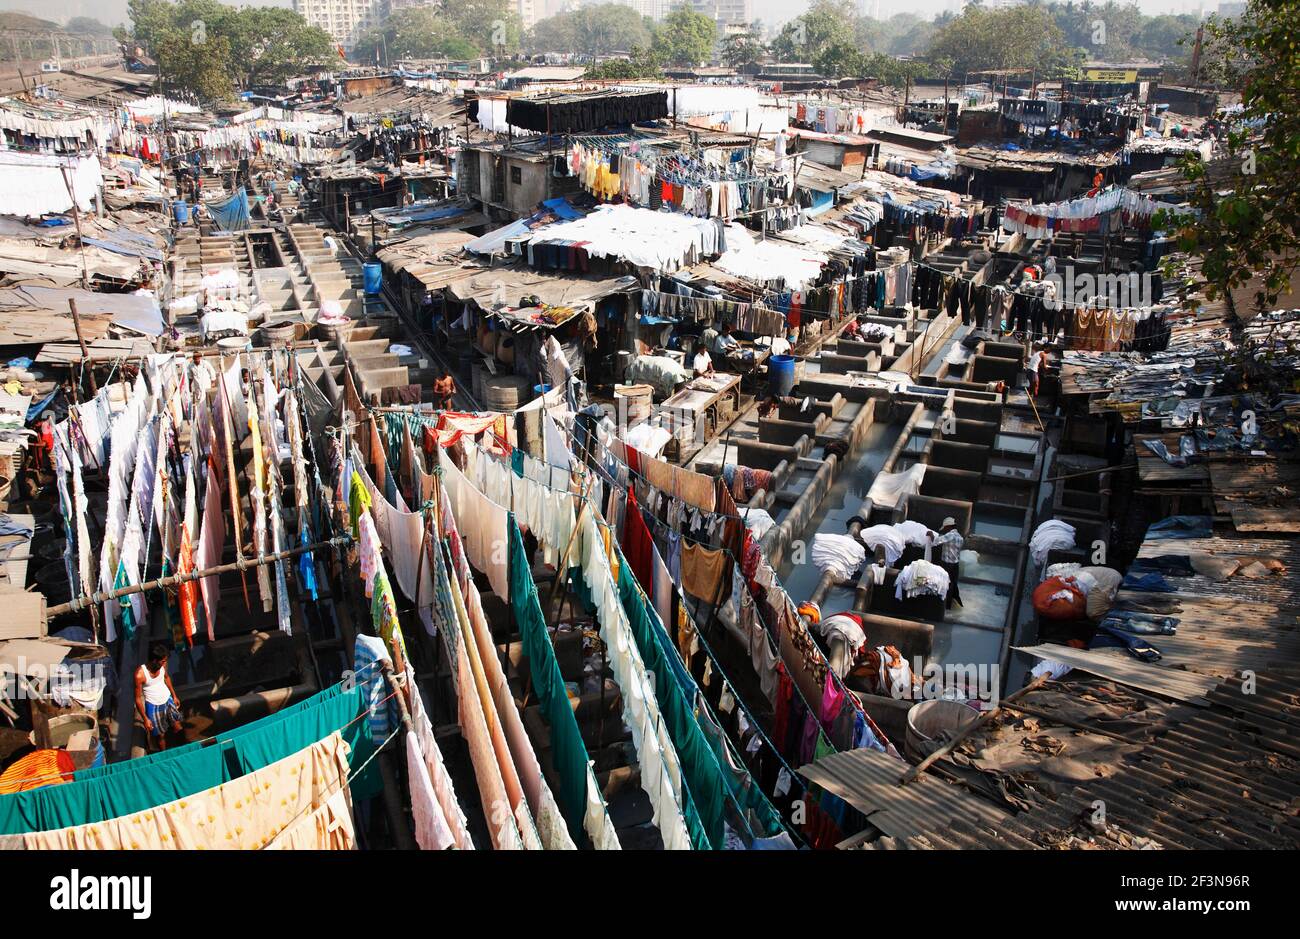 The Dhobi ghat laundries are special areas of the city, with row upon row of concrete wash pens, each fitted with its own flogging stone. Clothes sent Stock Photo